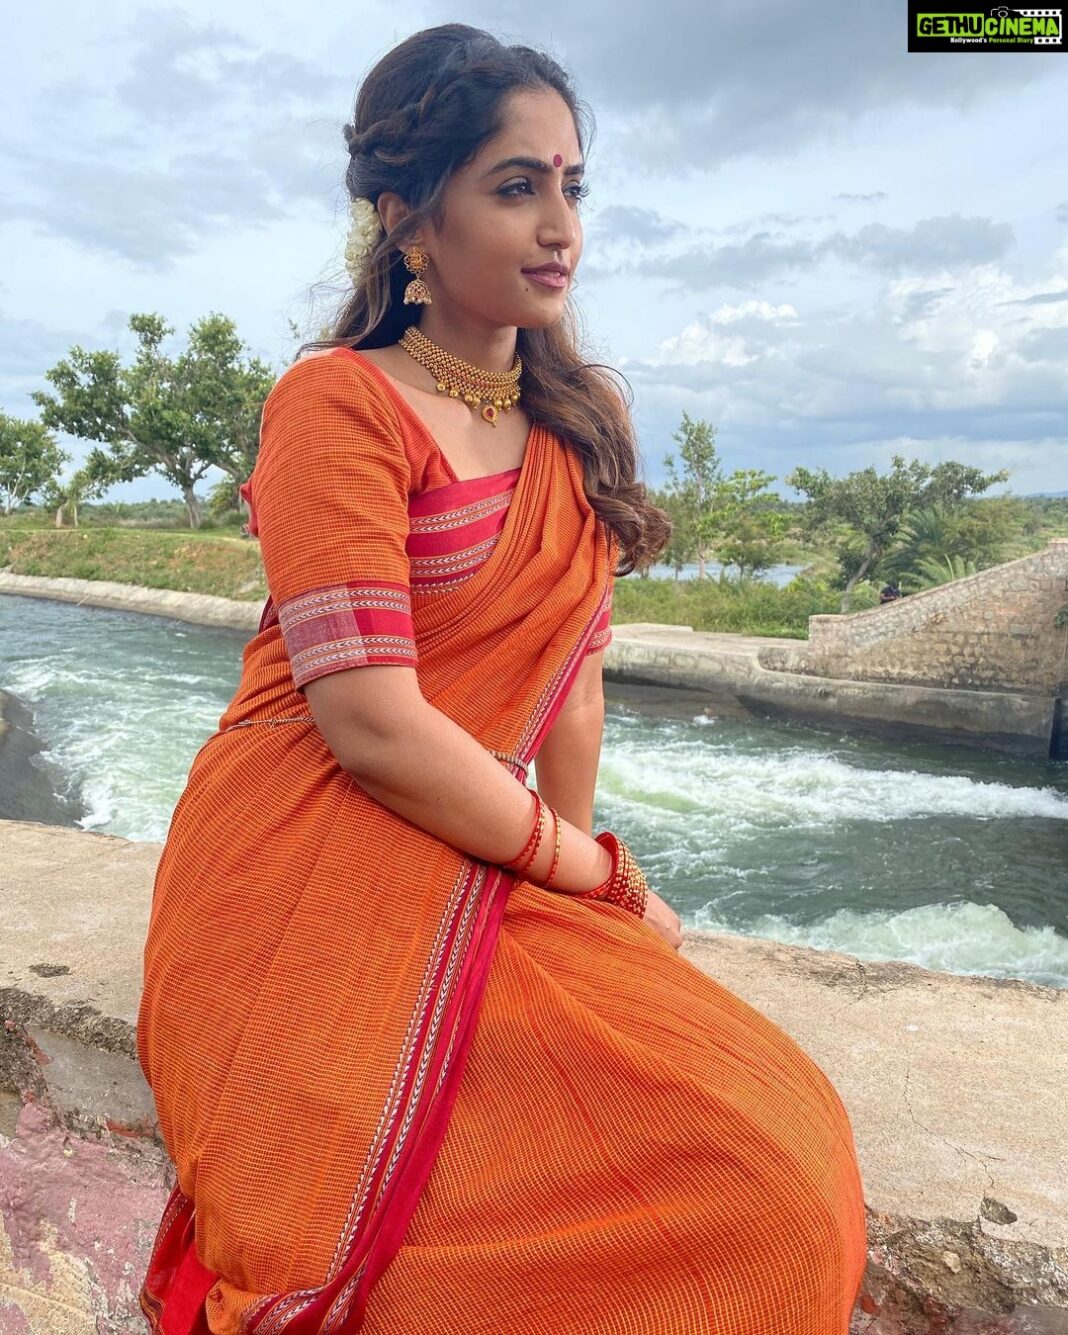 Reba Monica John Instagram - Set aadre gicchi gili gili 🎉💥😋 Had a blast shooting for this super fun song with some amazing people at the most beautiful locations! North Karnataka has my heart. More BTS coming up. Have you watched our film Rathnan Prapancha yet? If not, goooo now on @primevideoin ! ✨ #rathnanprapanchaonprime #kannadathi #northkarnatakaspecial #behindthescenes #bestexperienceever #onlylove